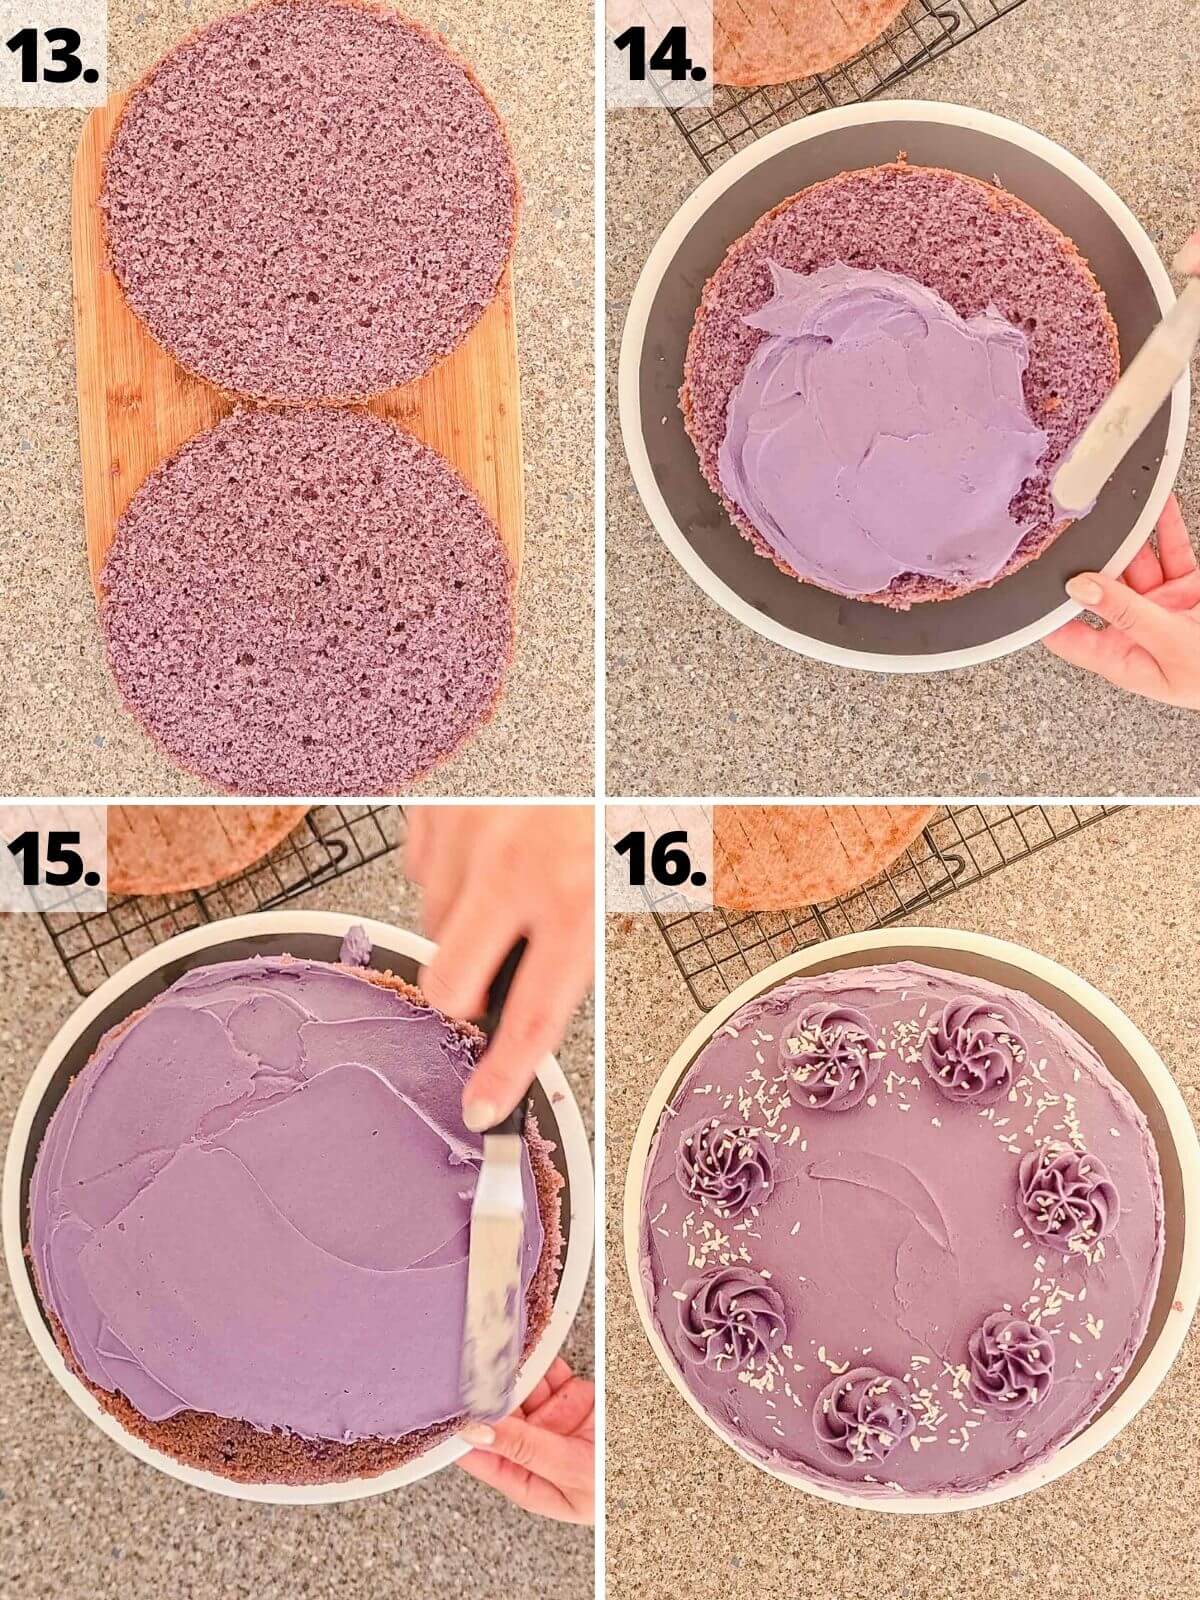 how to make purple yam ube cake recipe method assembly steps 13 to 16.